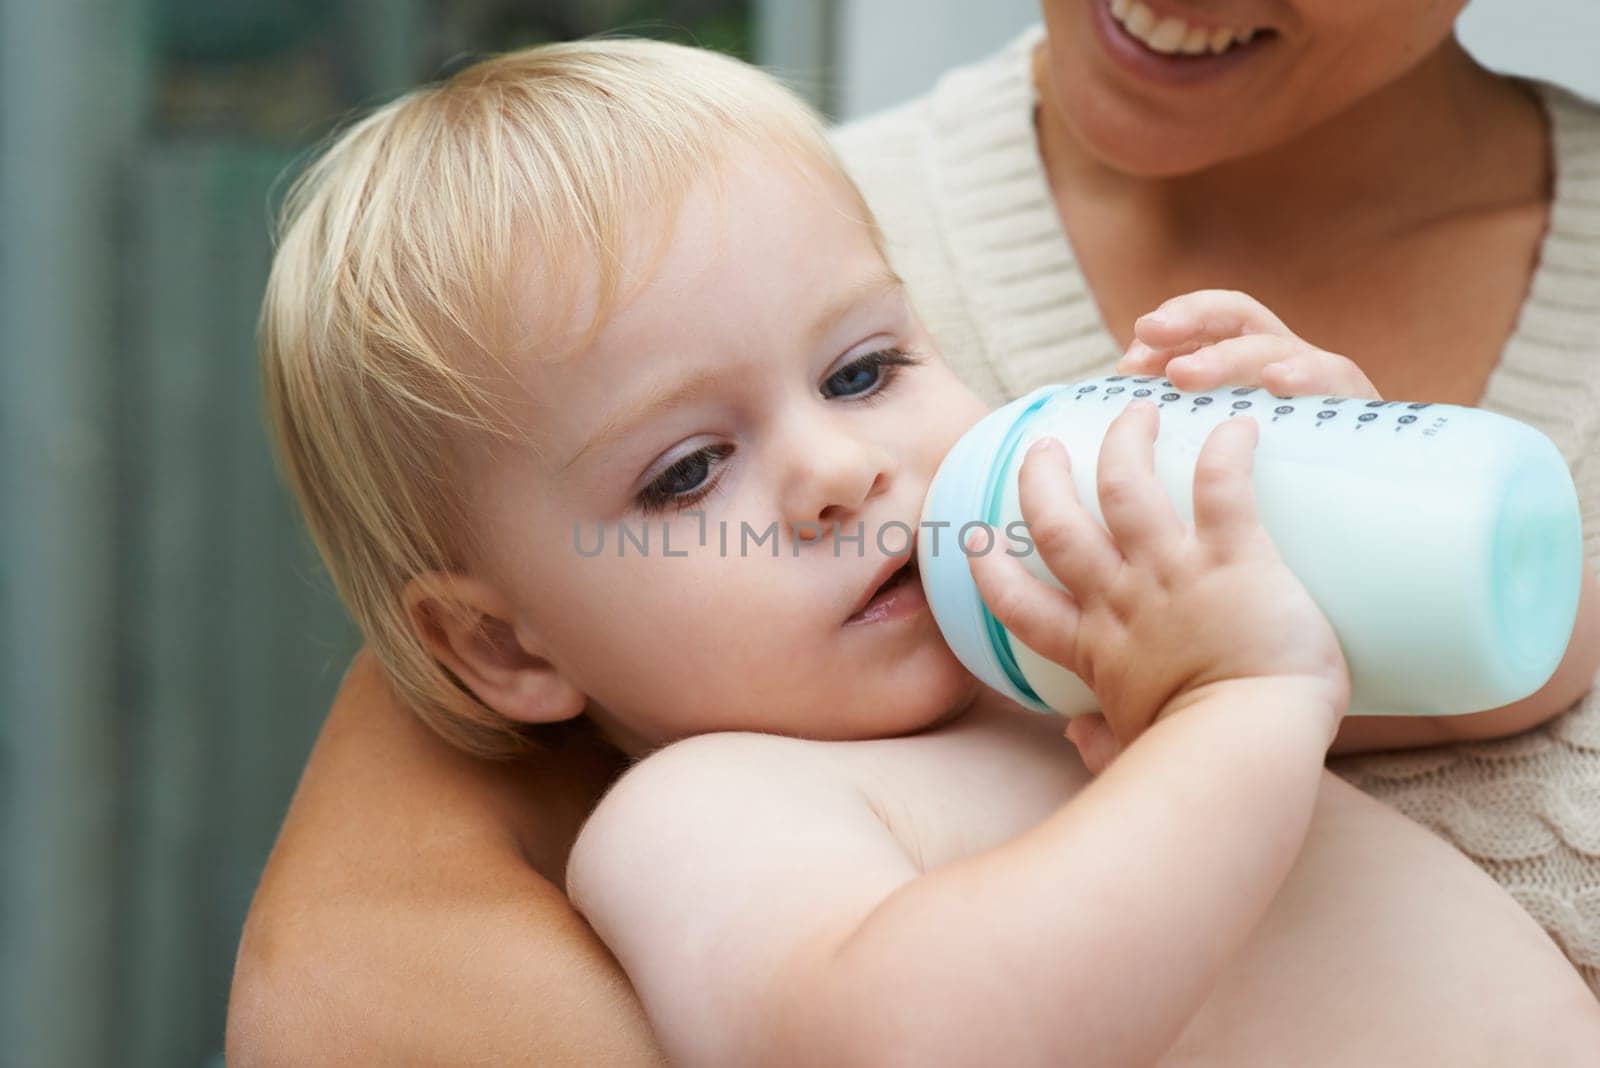 Relax, sweet and baby drinking bottle and laying with mother for milk and bonding together. Cute, growth and infant, kid or toddler enjoying a beverage for nutrition, health and child development